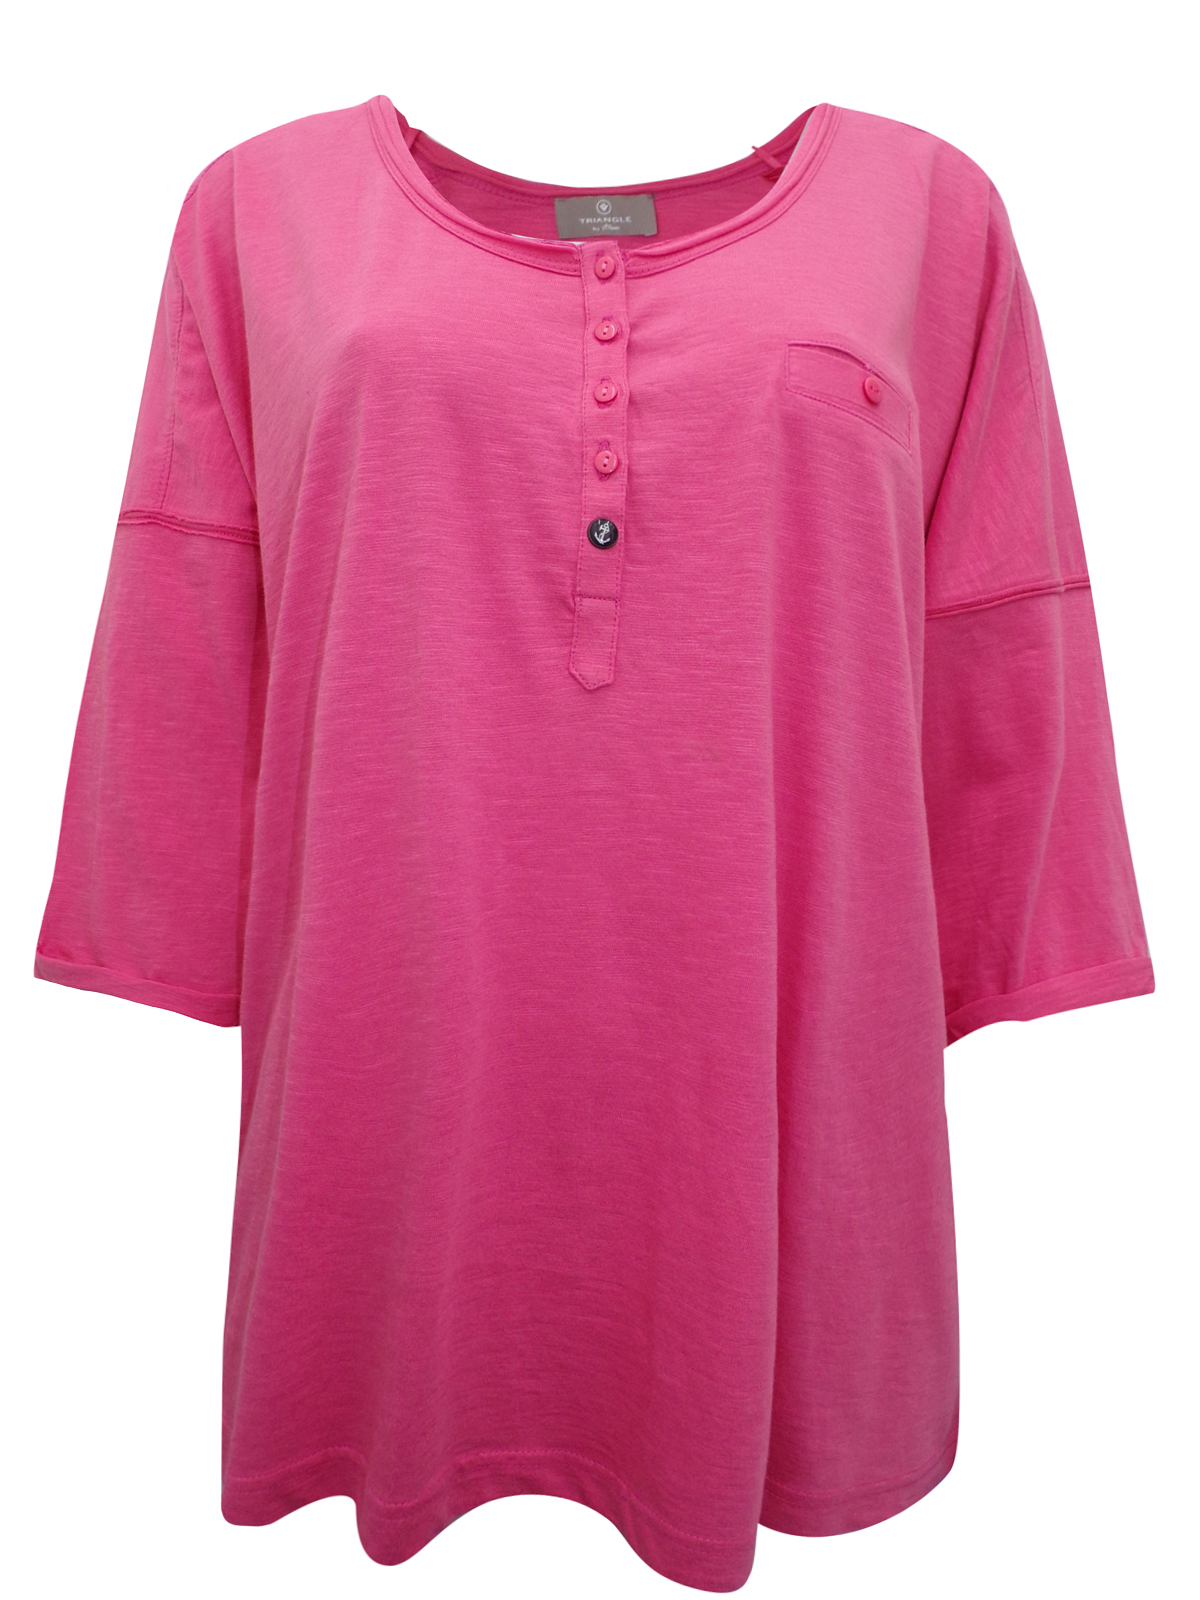 S.Oliver - Triangle - - Triangle SALMON Pure Cotton Drop Shoulder Top ...